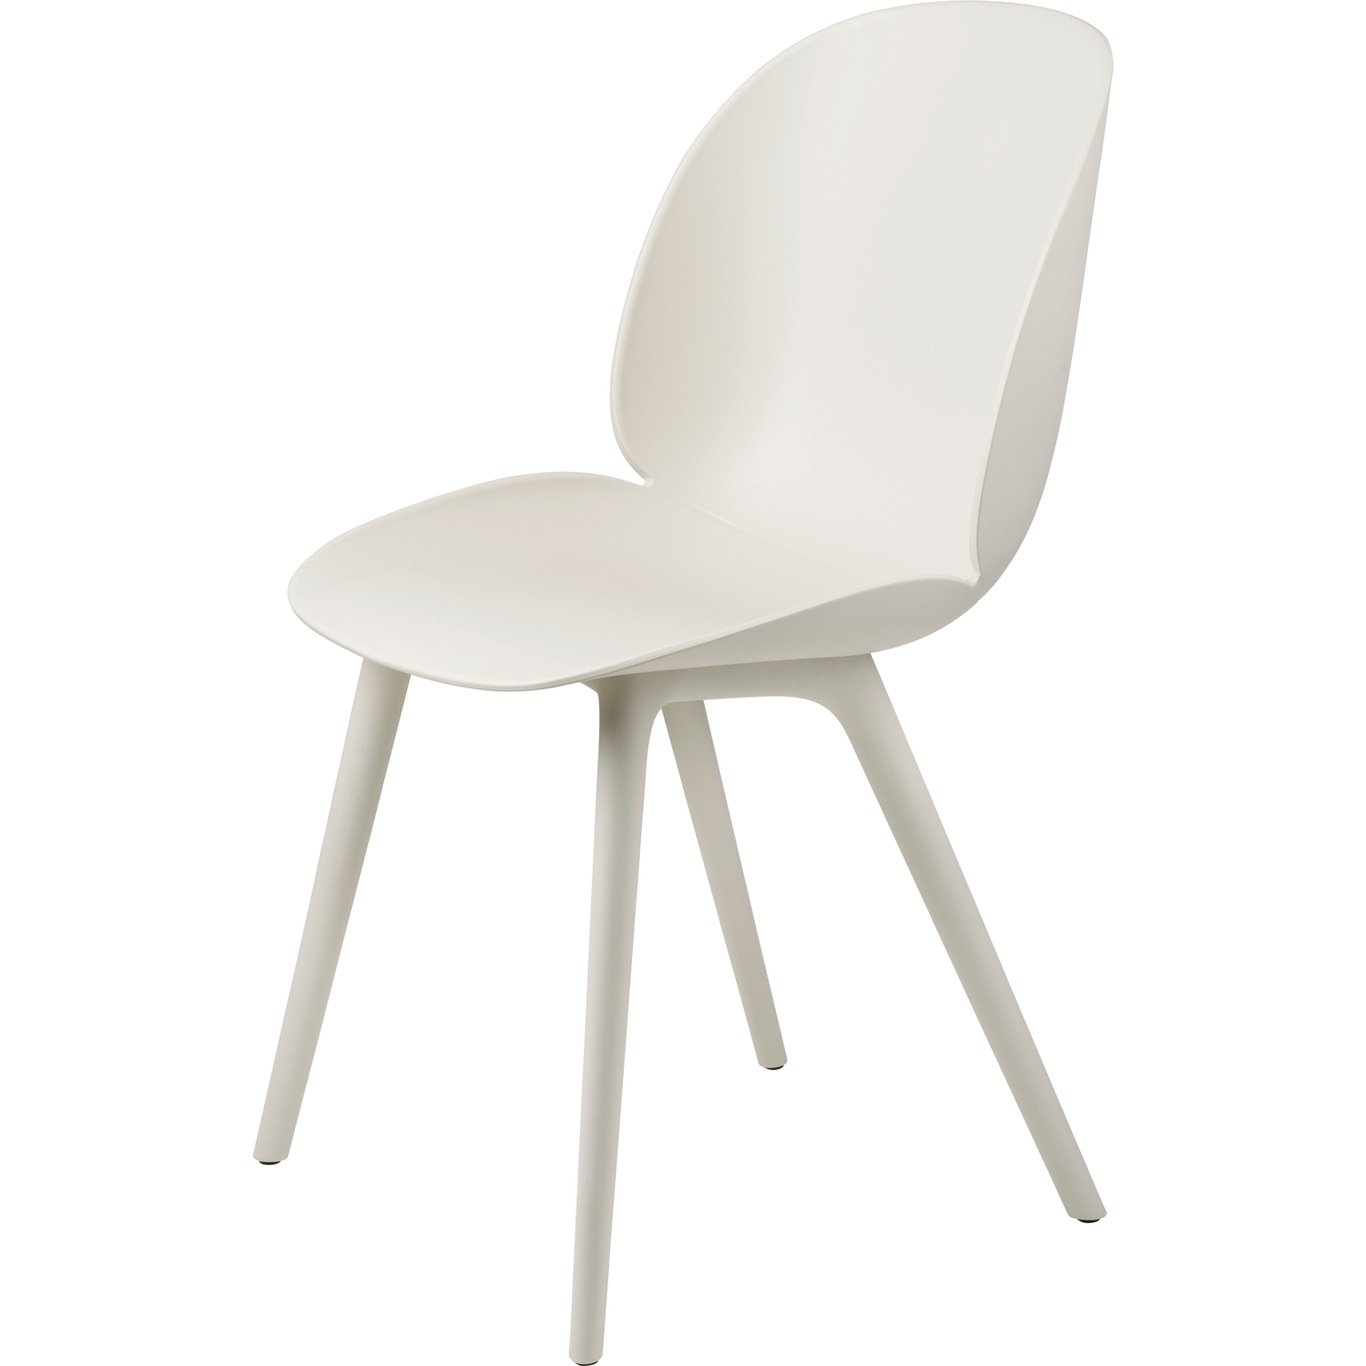 Beetle Dining Chair Outdoor, Alabaster White